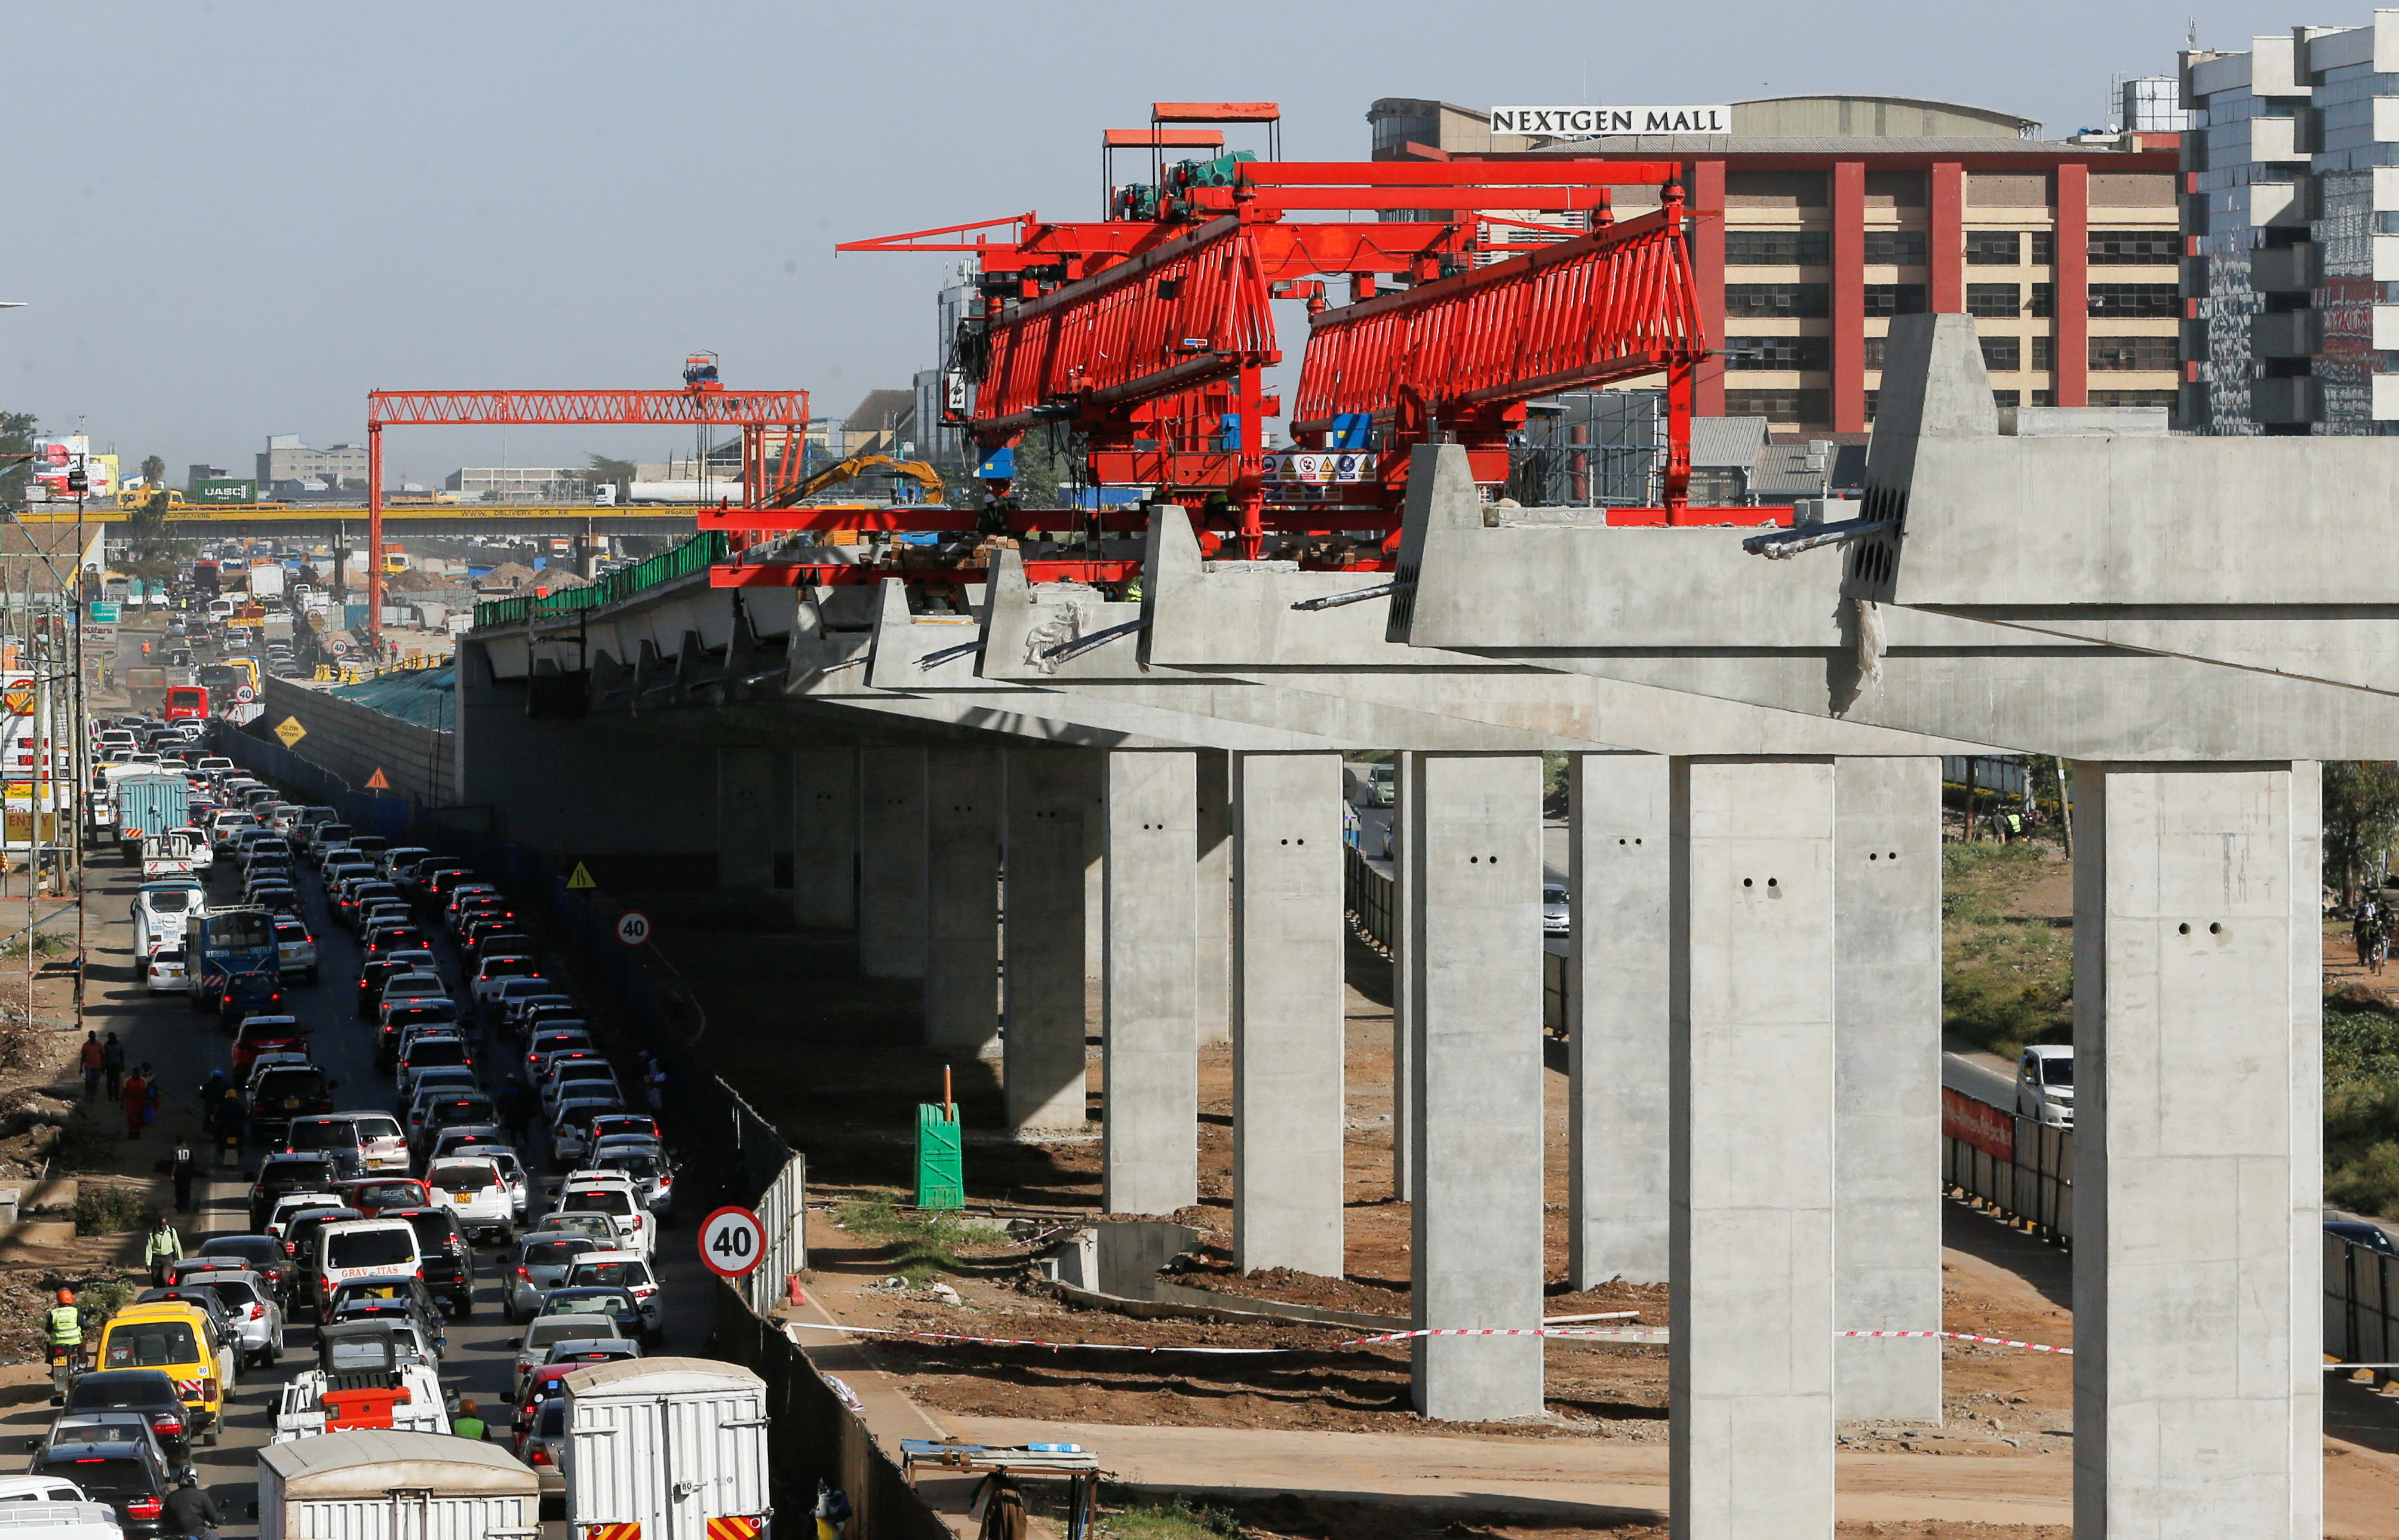 Concrete pillars are seen erected as motorists drive on the controlled diversion during the construction of the Nairobi Expressway in Nairobi